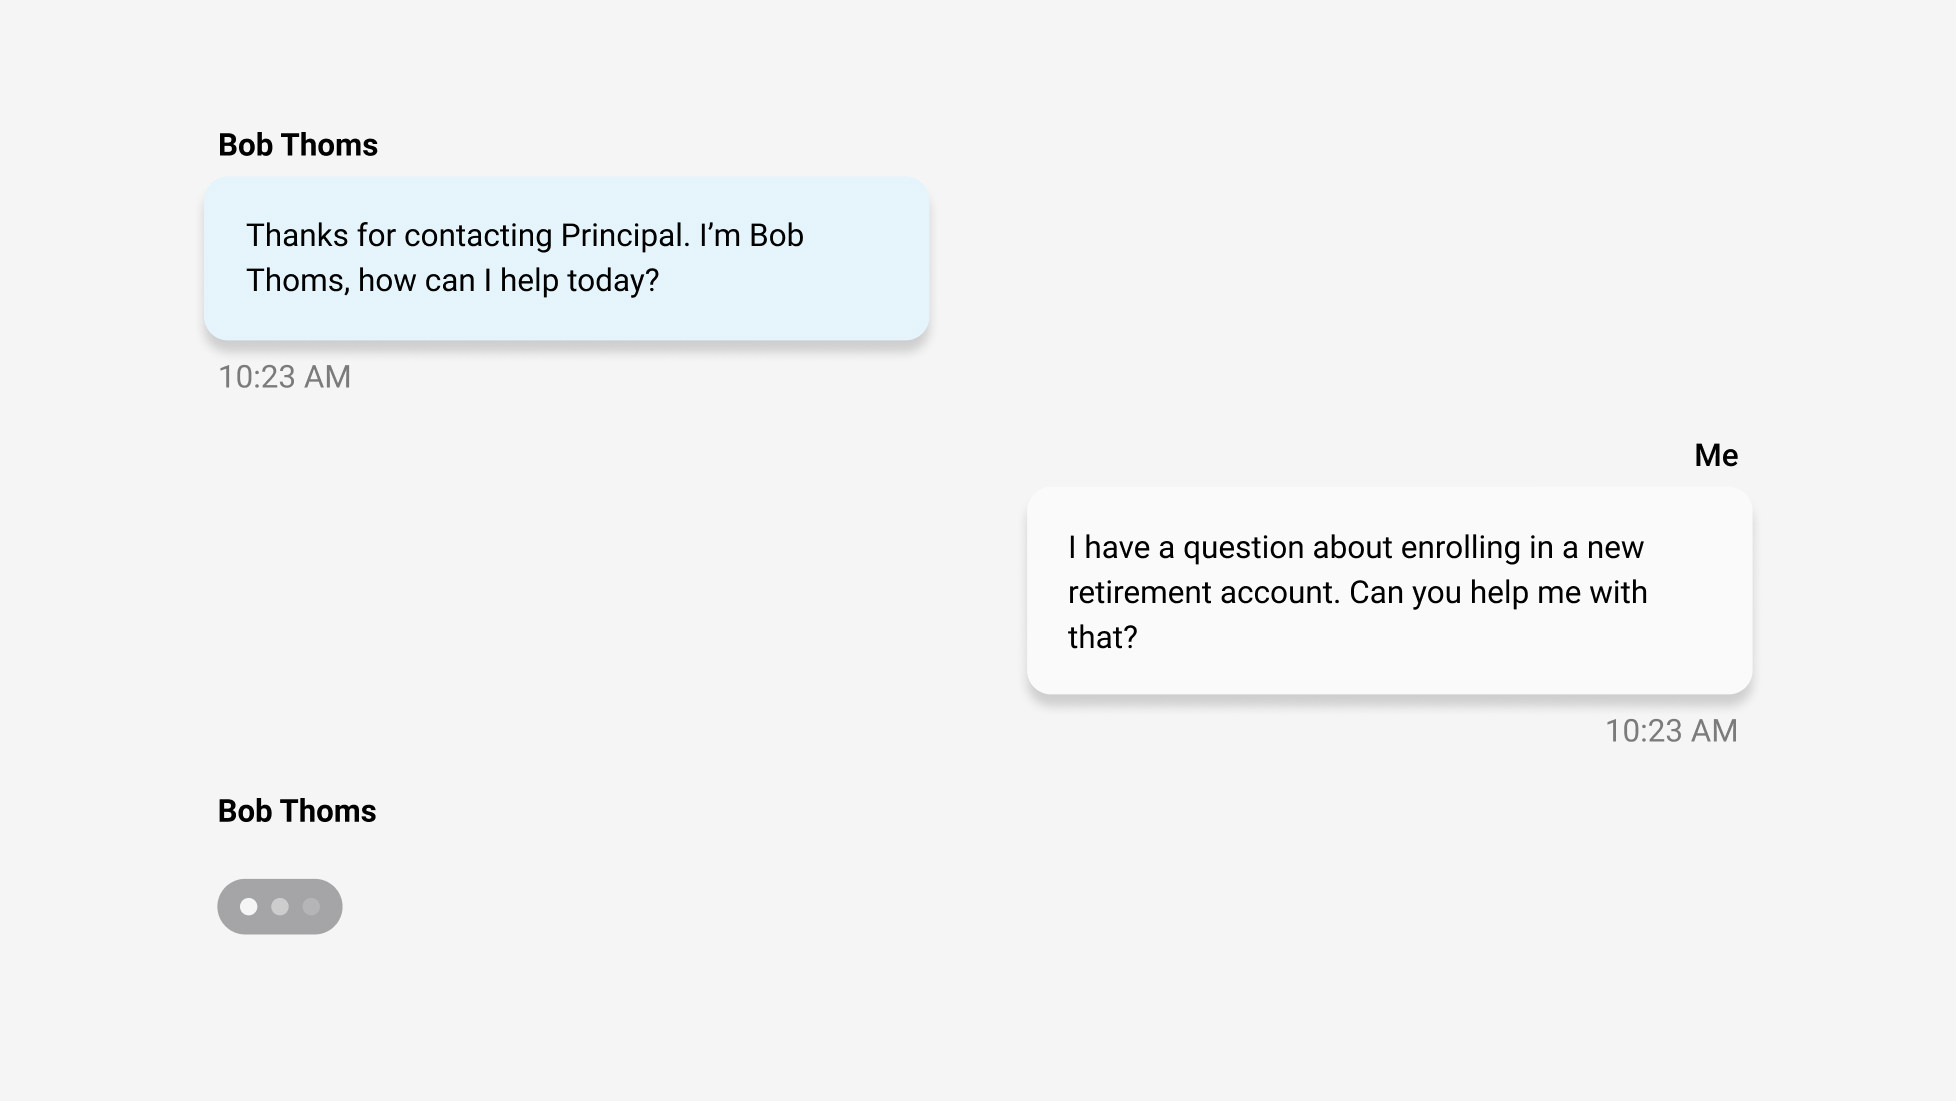 Sample conversations from Cantina's chatbot prototype.